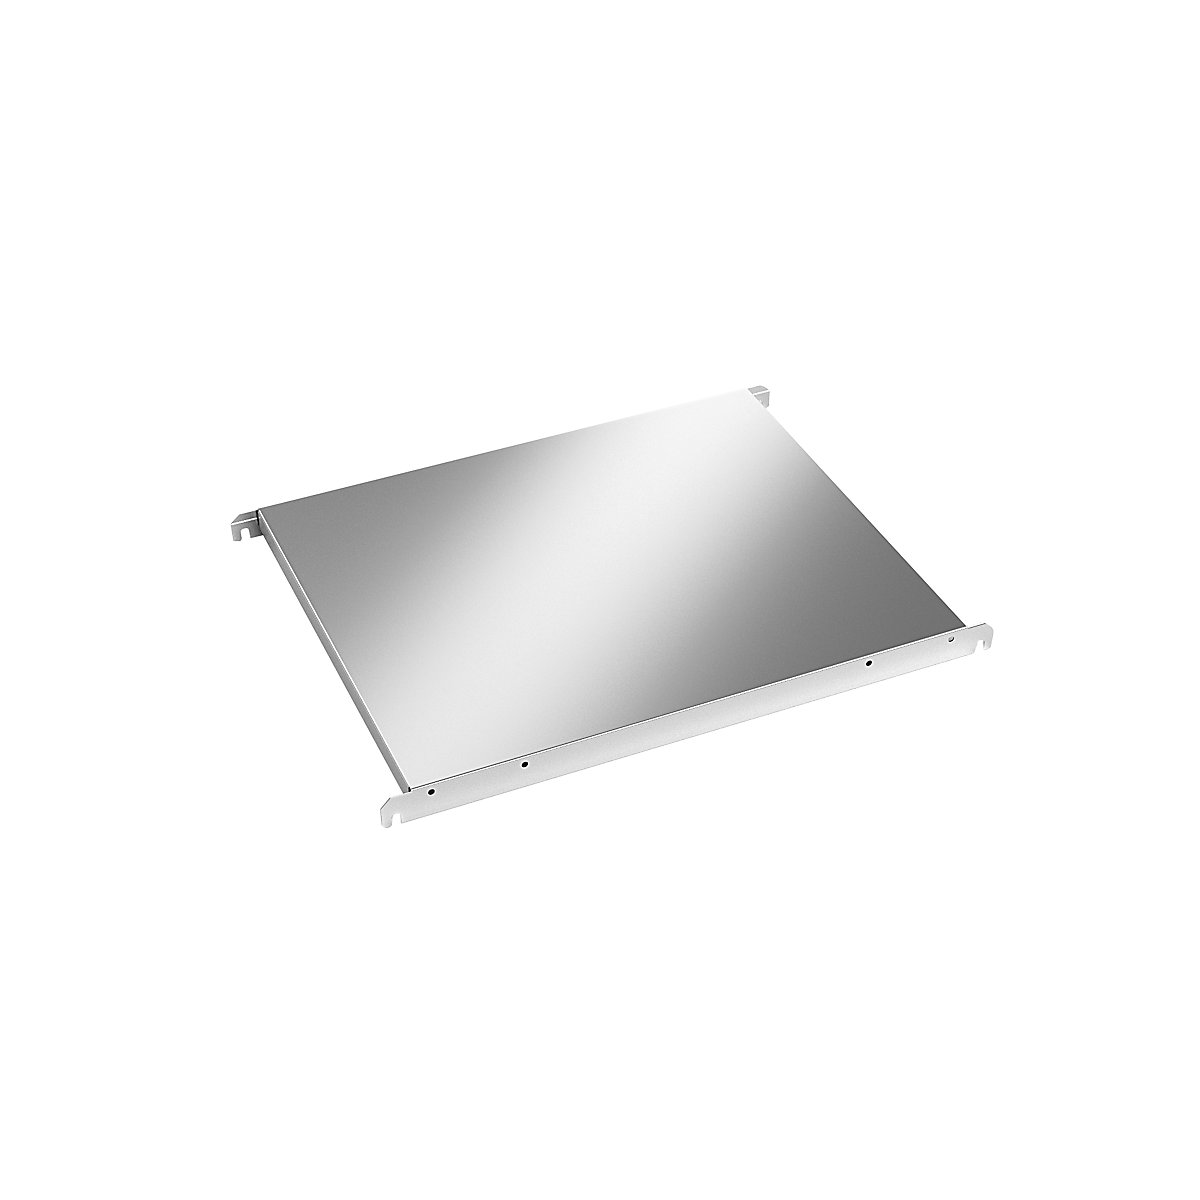 Stainless steel shelf, solid, WxD 640 x 540 mm